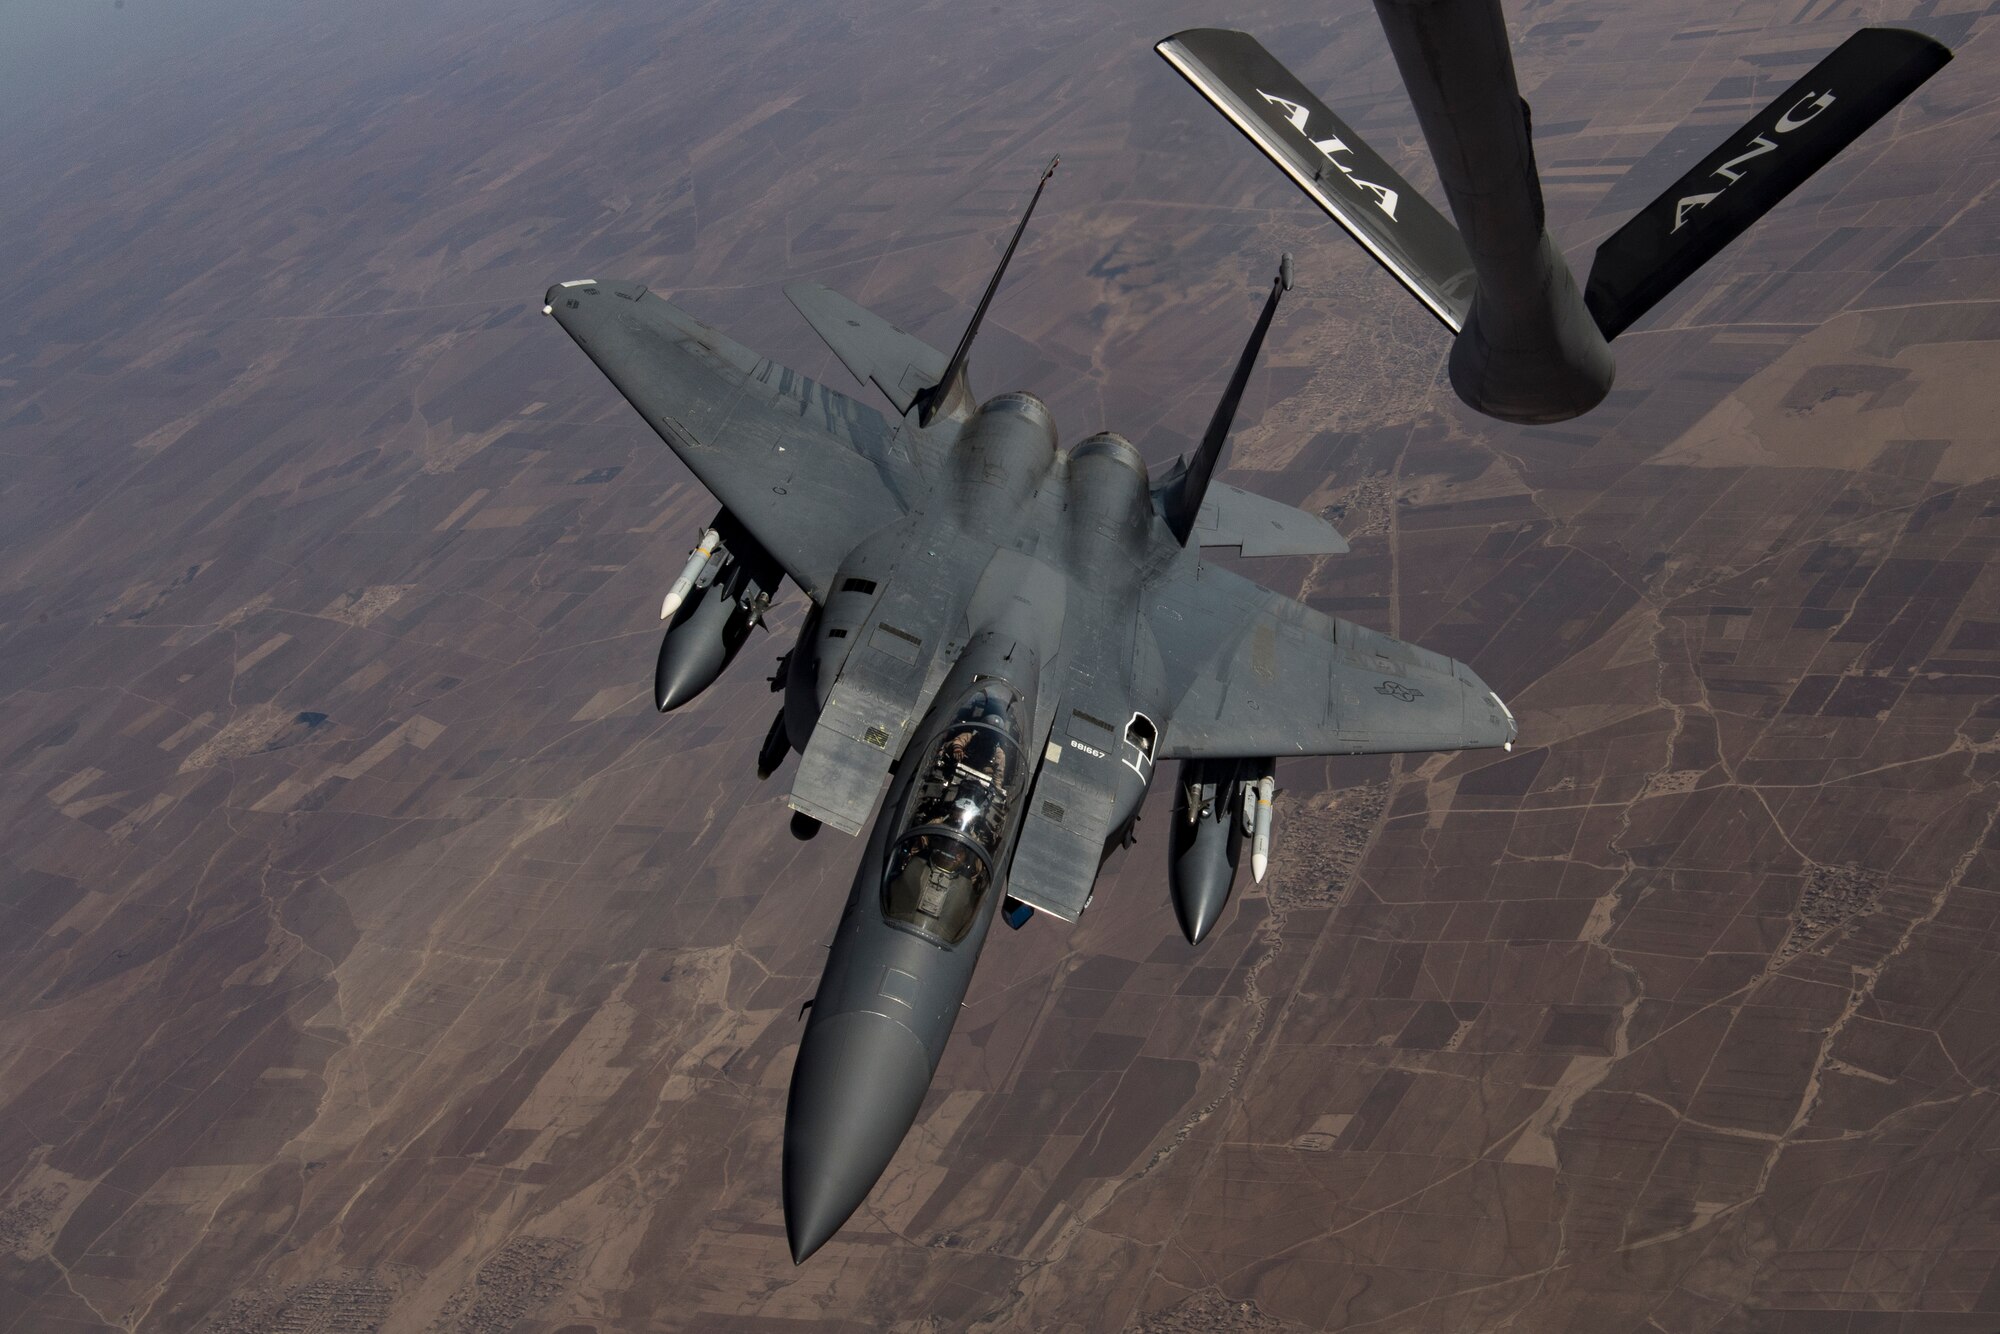 A U.S. Air Force F-15 Strike Eagle departs a U.S. Air Force KC-135 Stratotanker after conducting an aerial refueling over northern Iraq, Nov. 20, 2019.